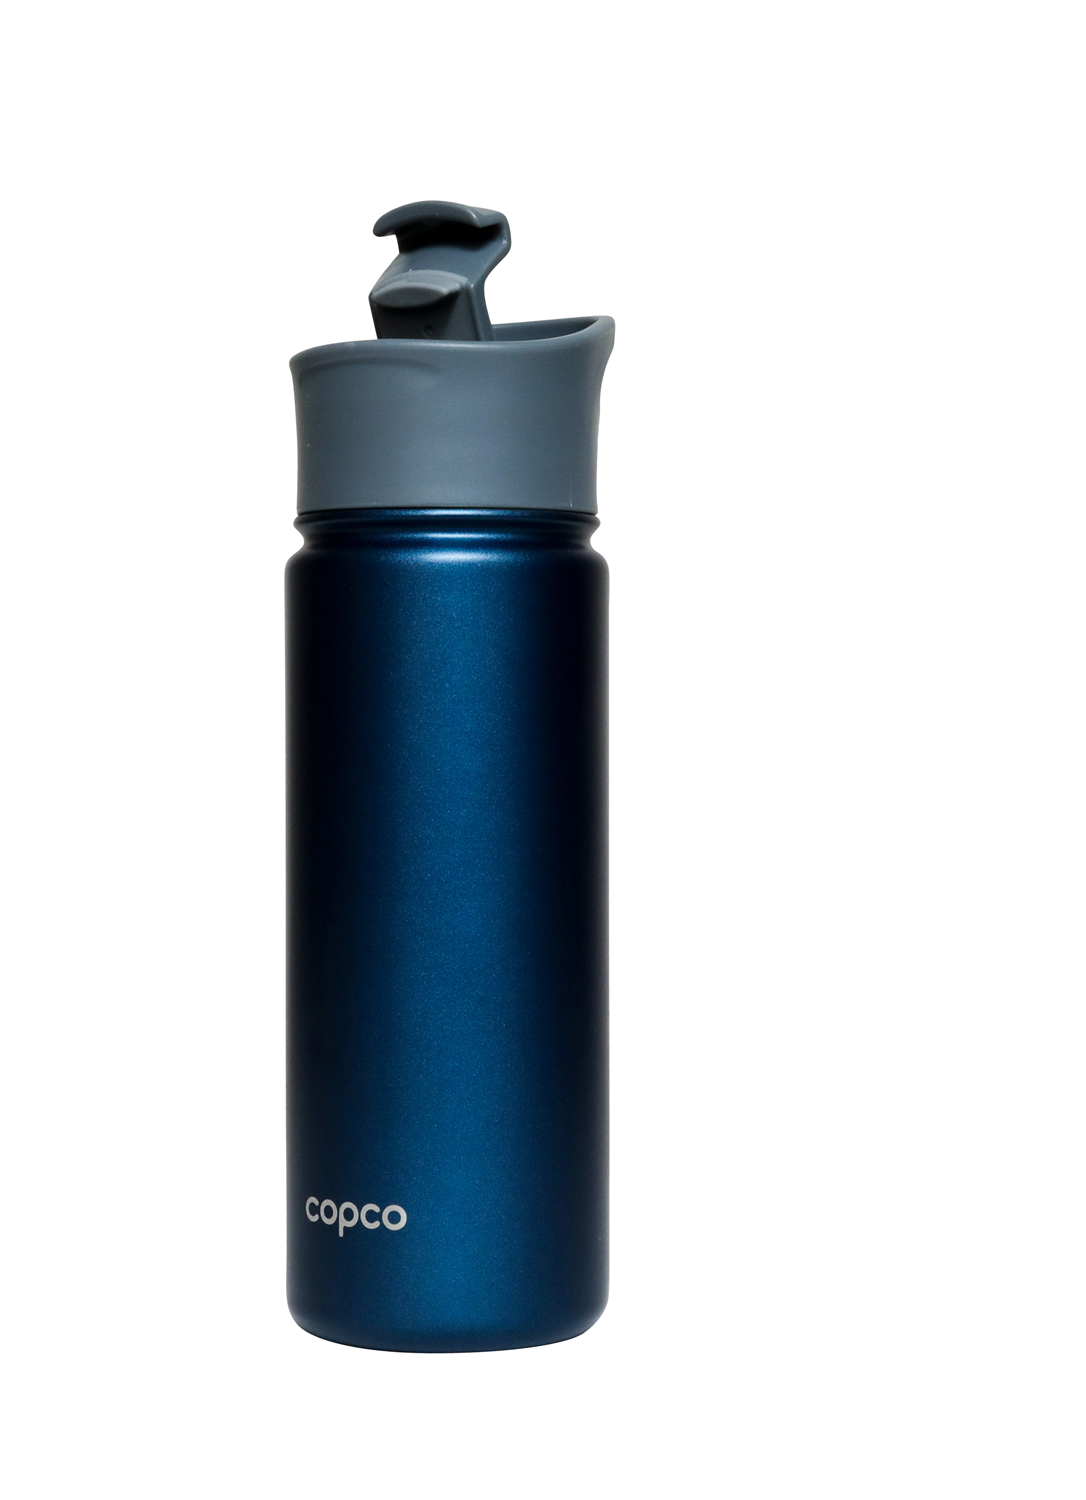 Copco Stainless Steel Double Wall Insulated Sports Water Bottle w/ Flip Top Blue eBay